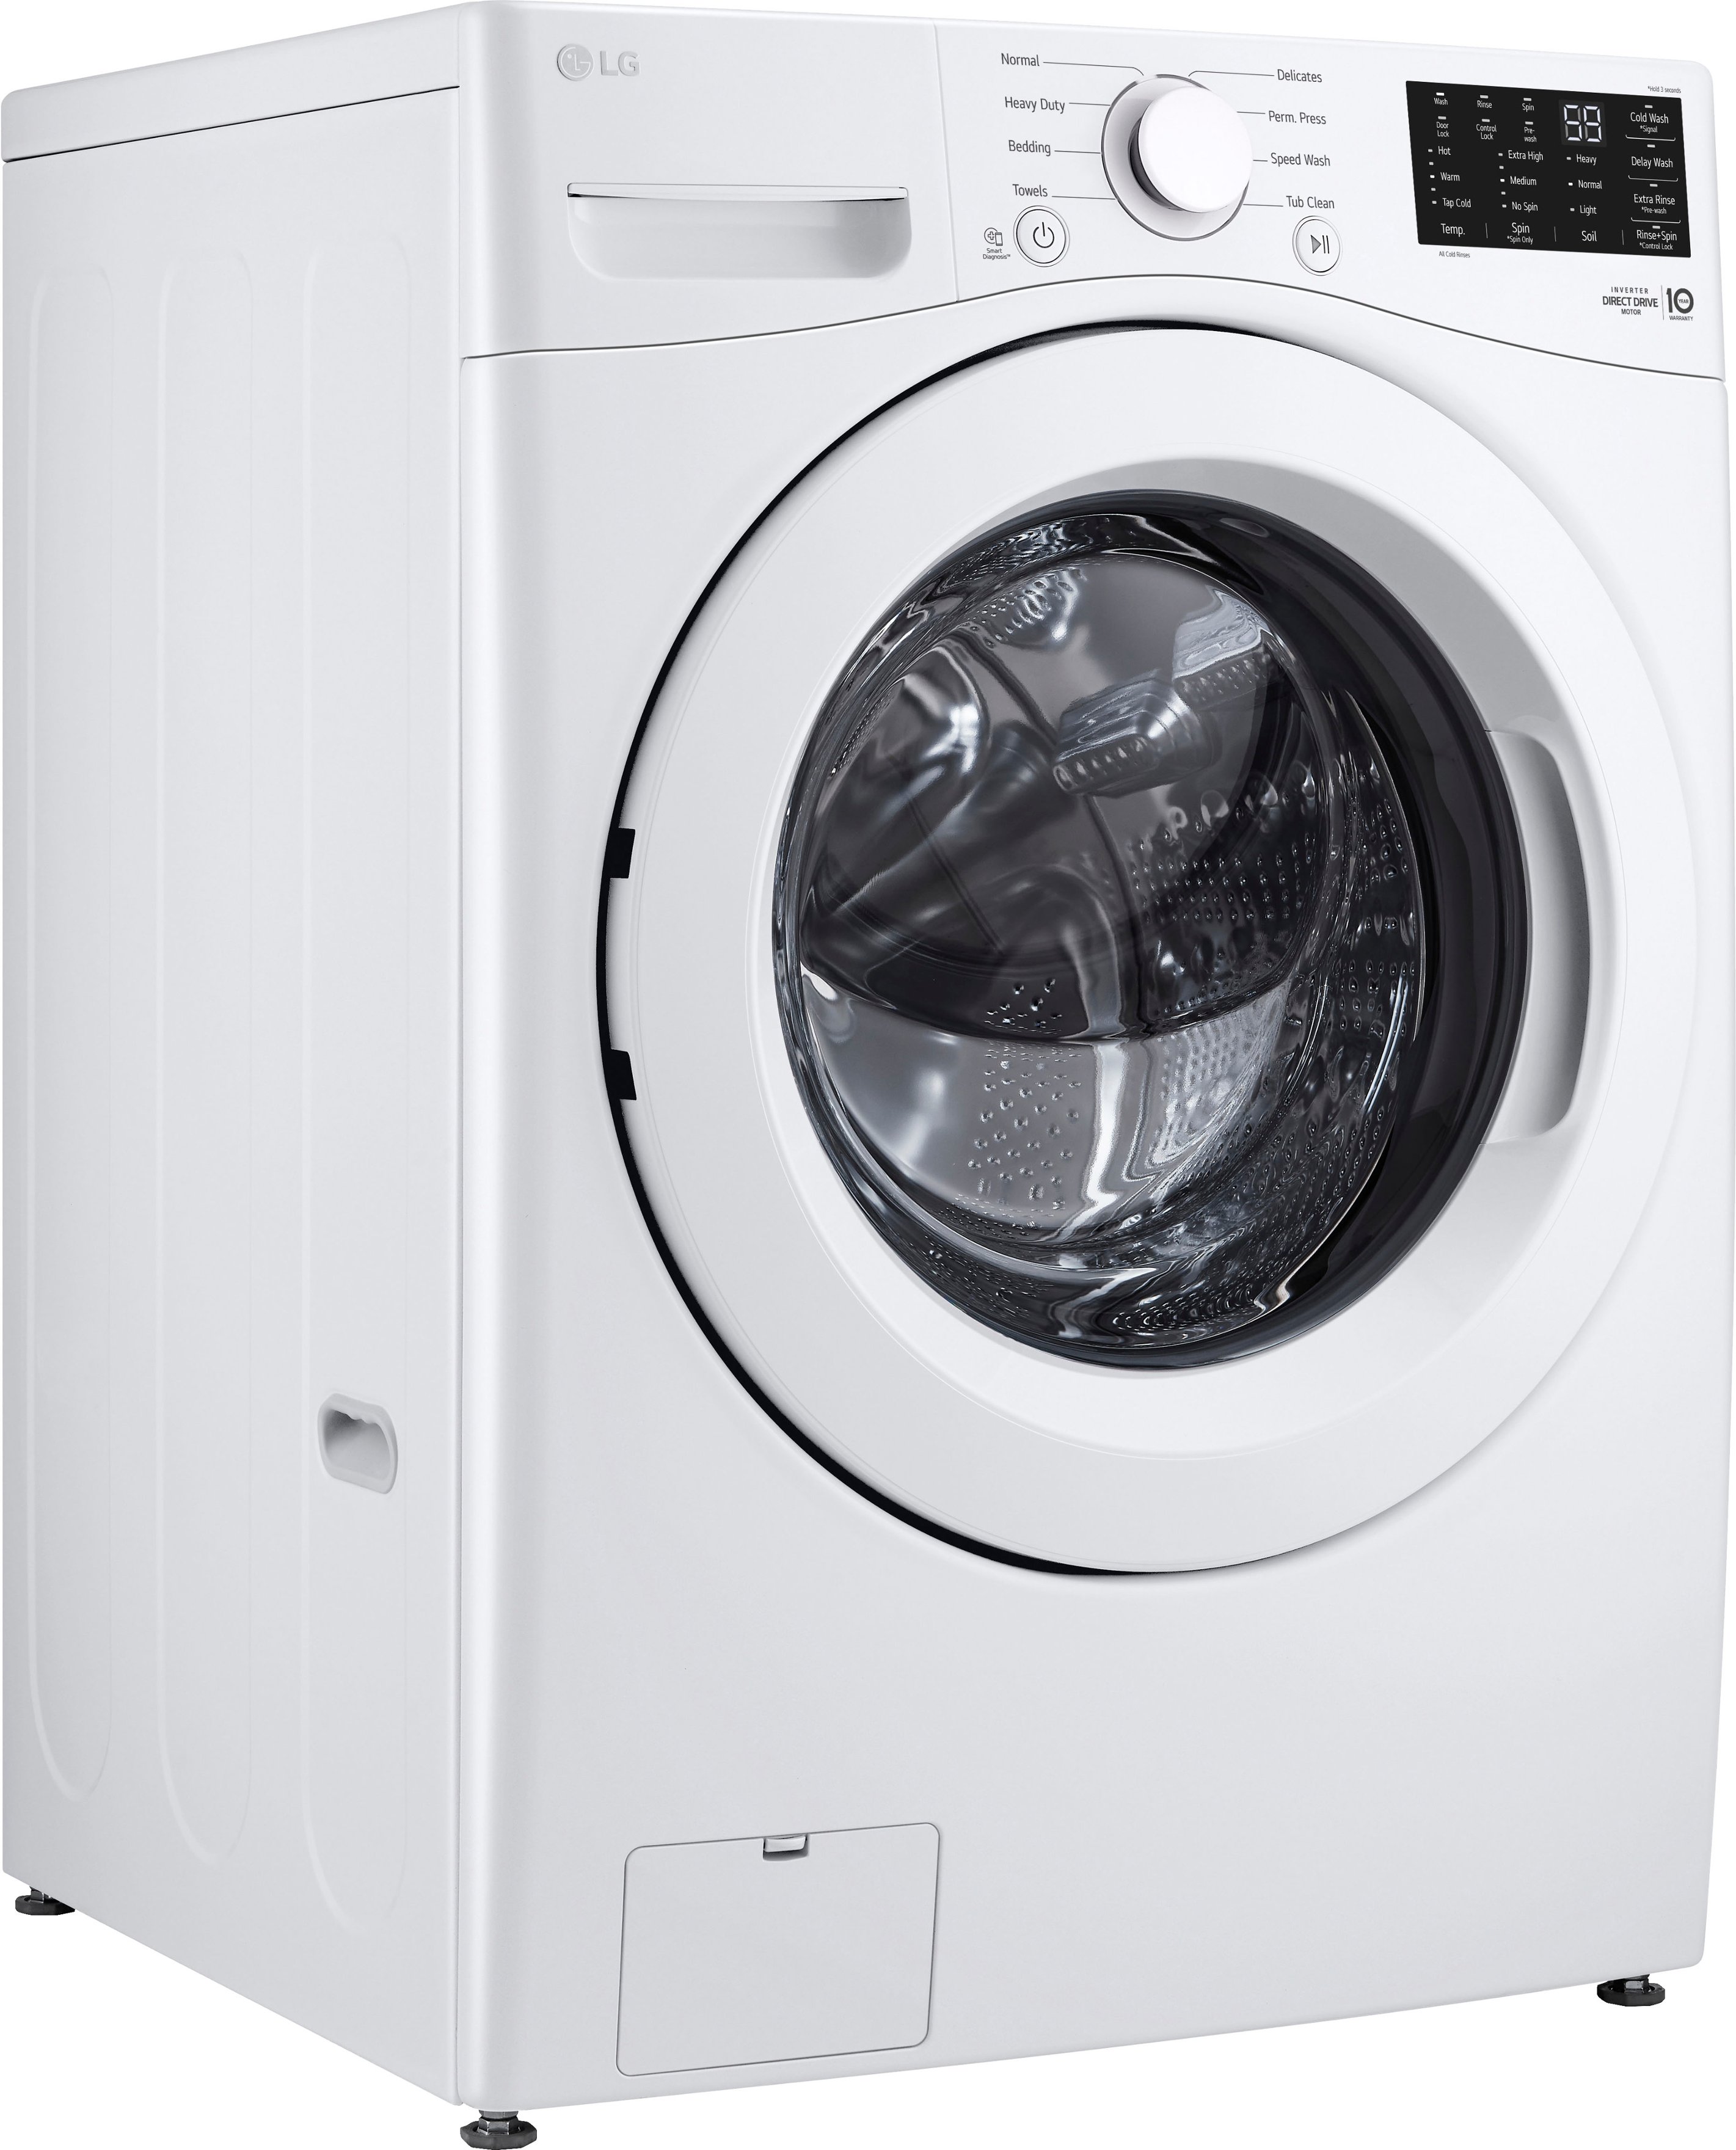 LG 5.0 Cu. Buy - Ft. Load Washer High-Efficiency WM3470CW 6Motion Technology Front White with Best